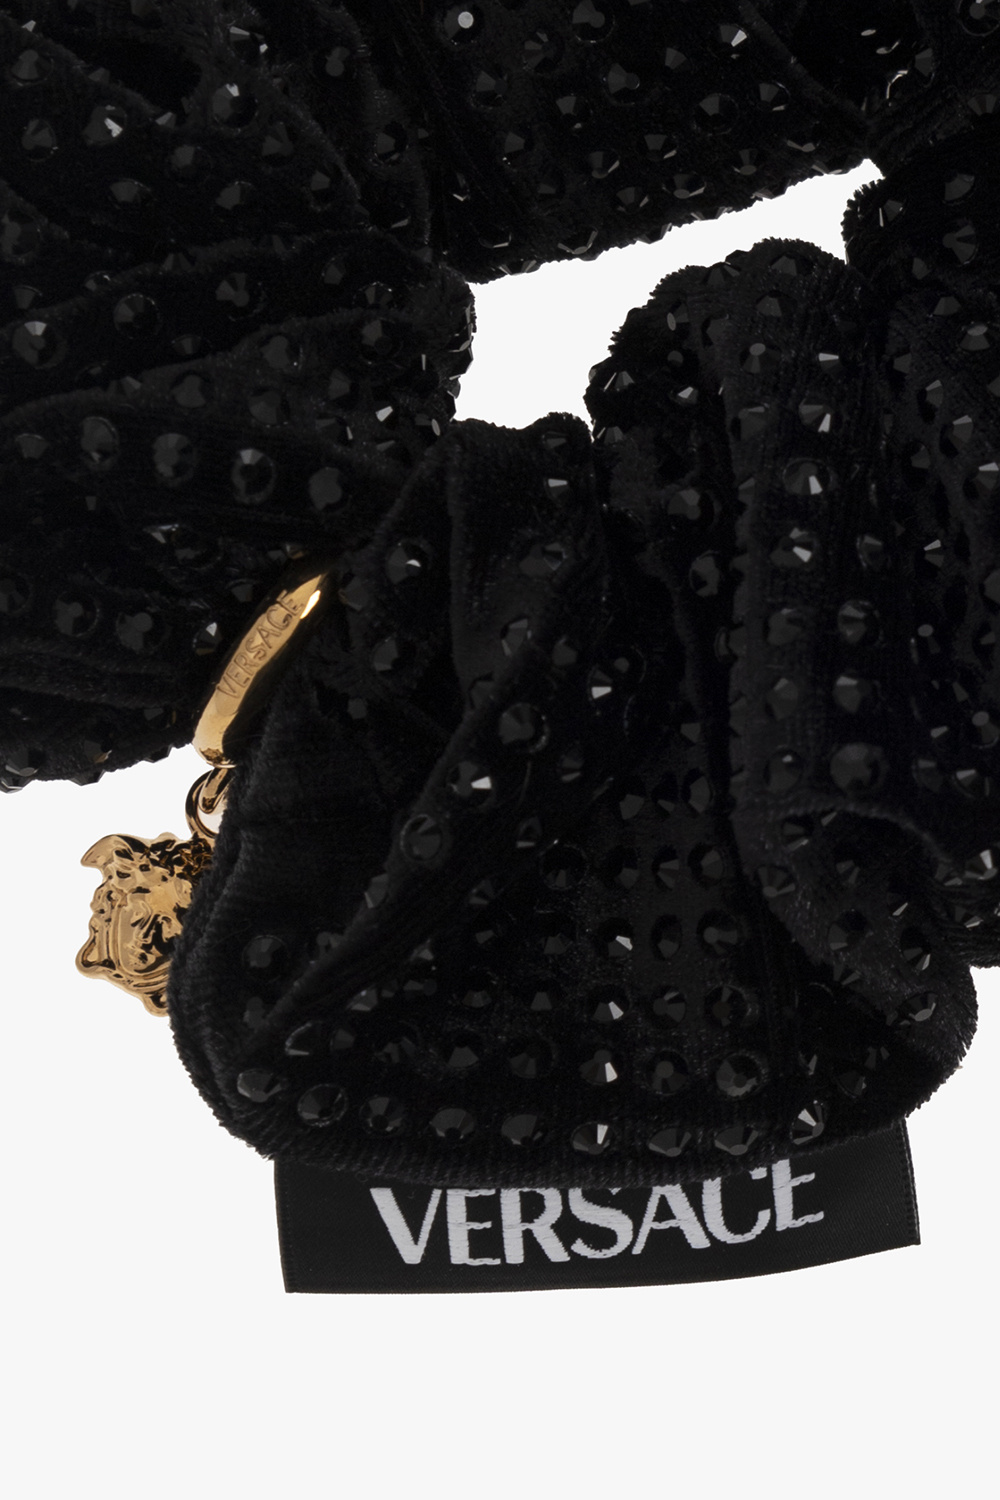 Versace TOP TRENDS FOR THE FALL/WINTER SEASON